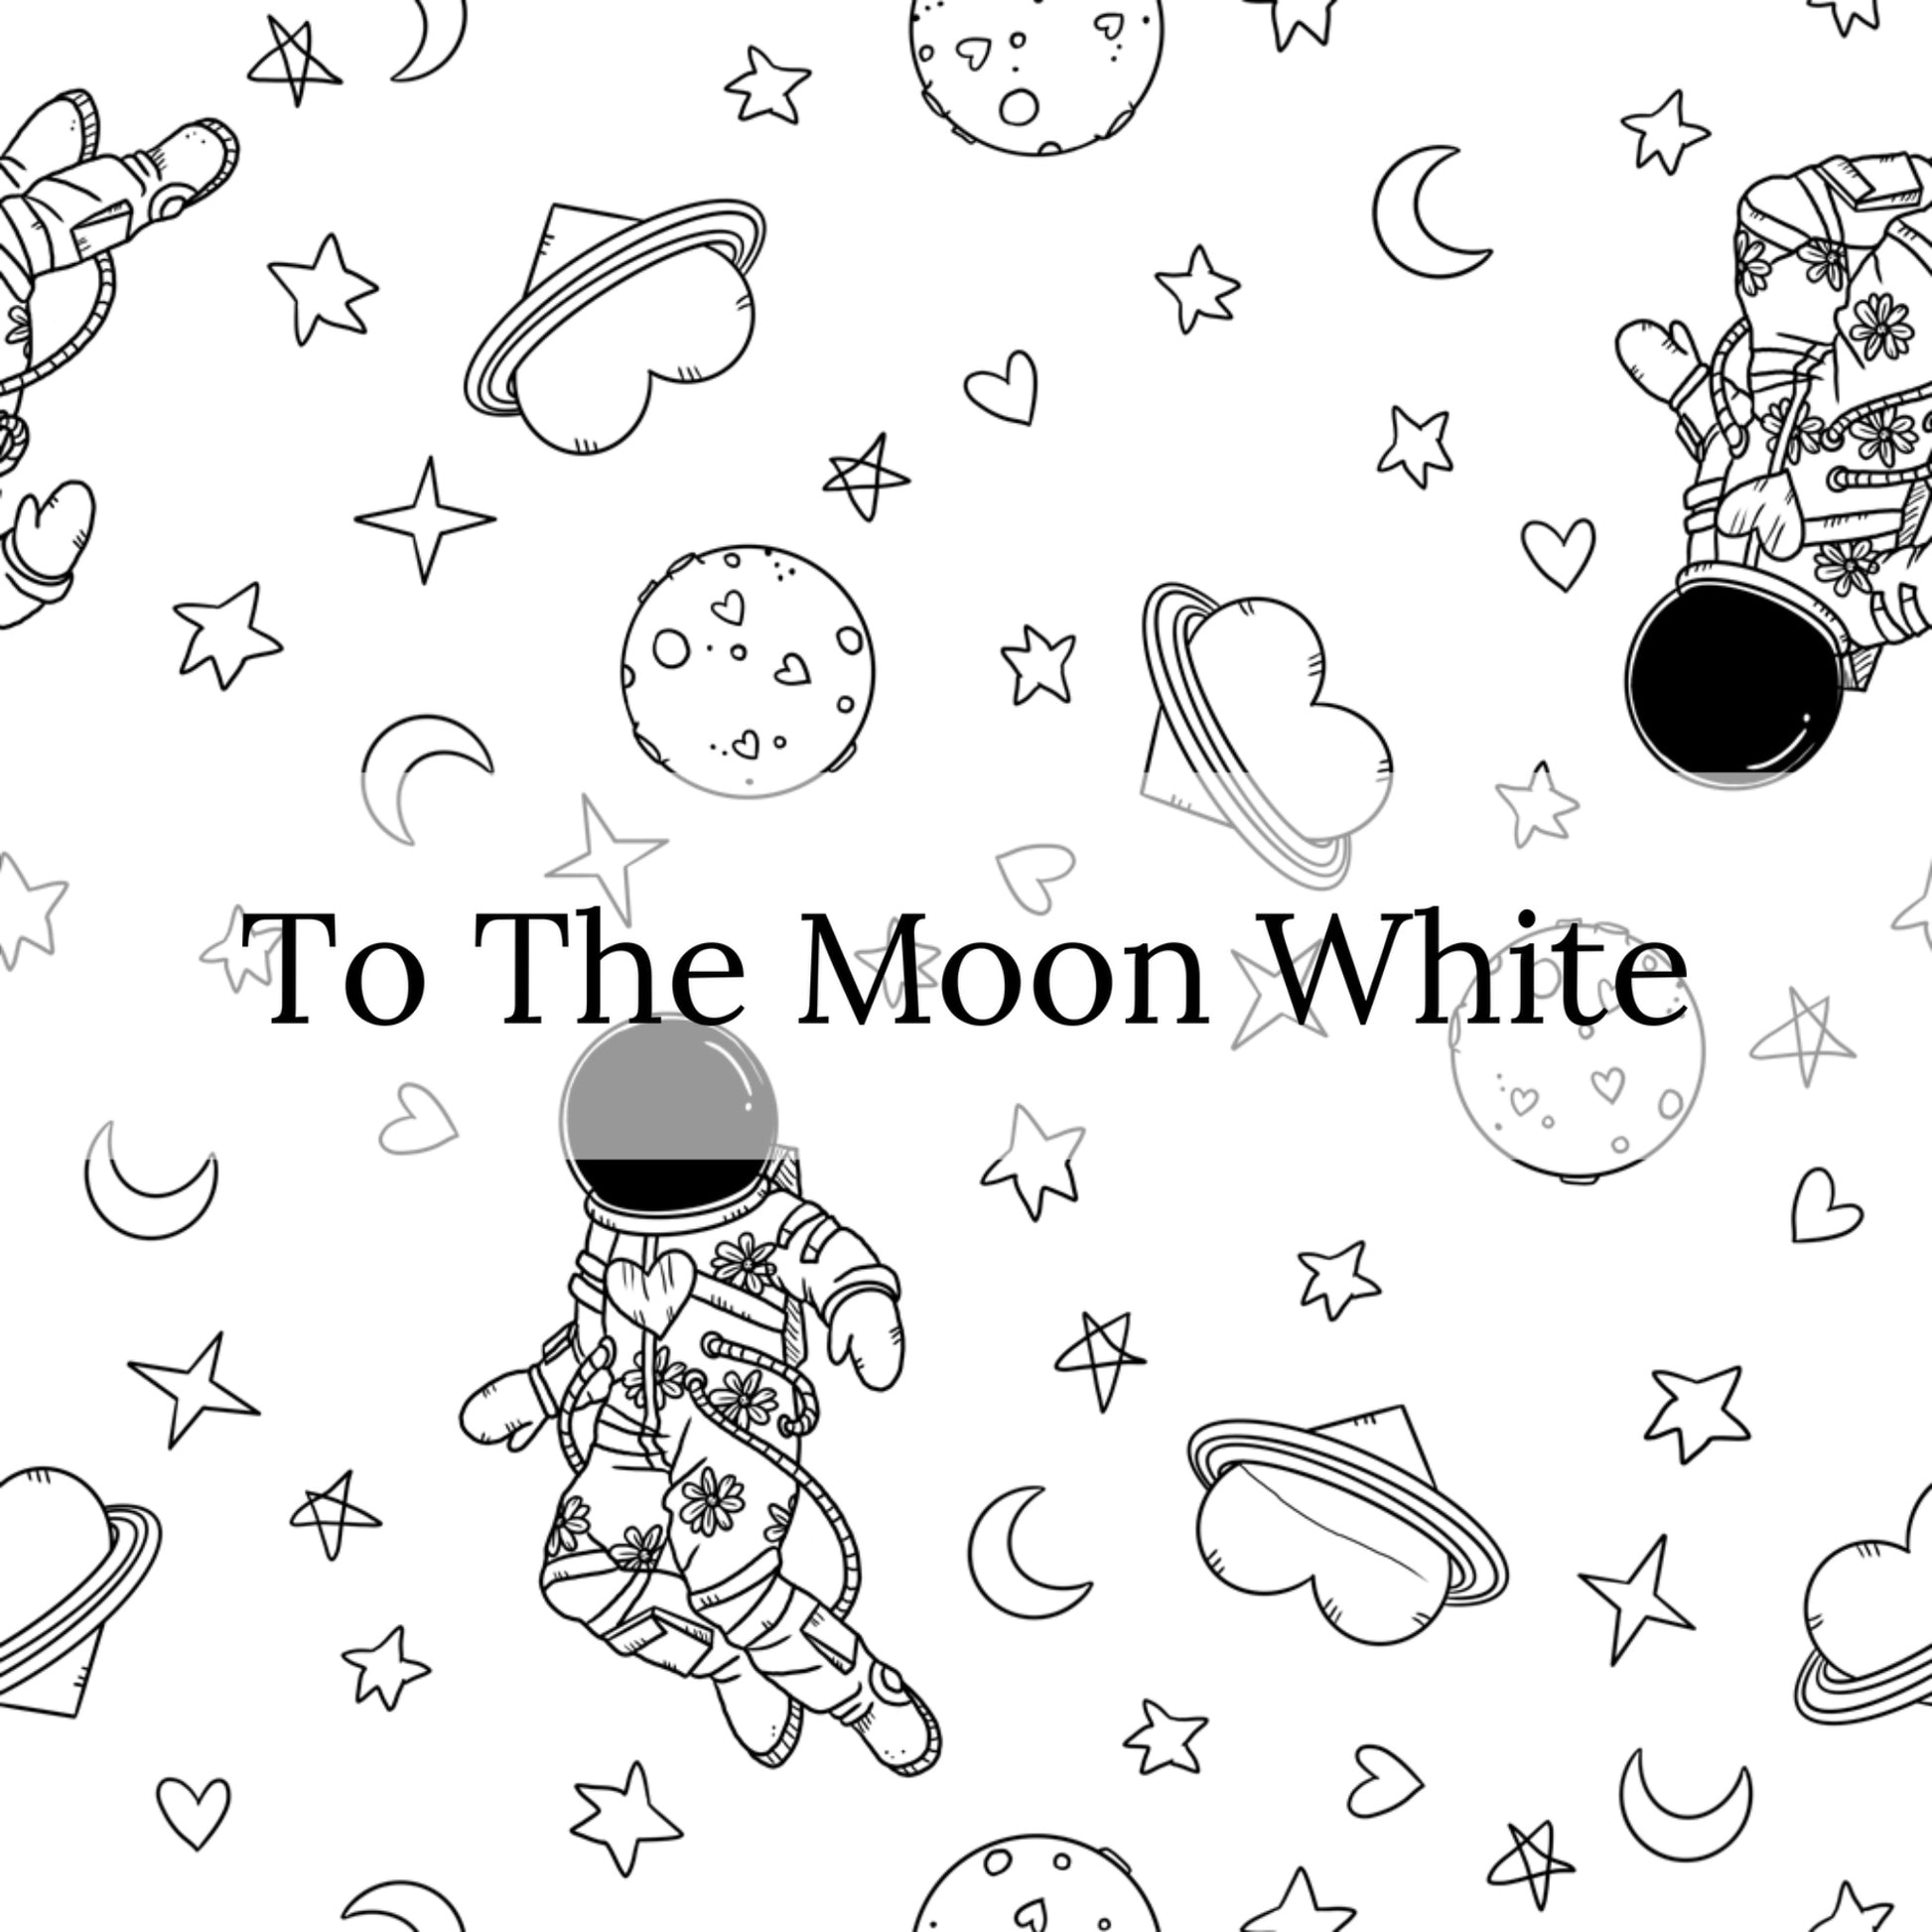 White pattern with the outlines of hearts, stars, and astronauts and the words "To The Moon White" fabric pattern